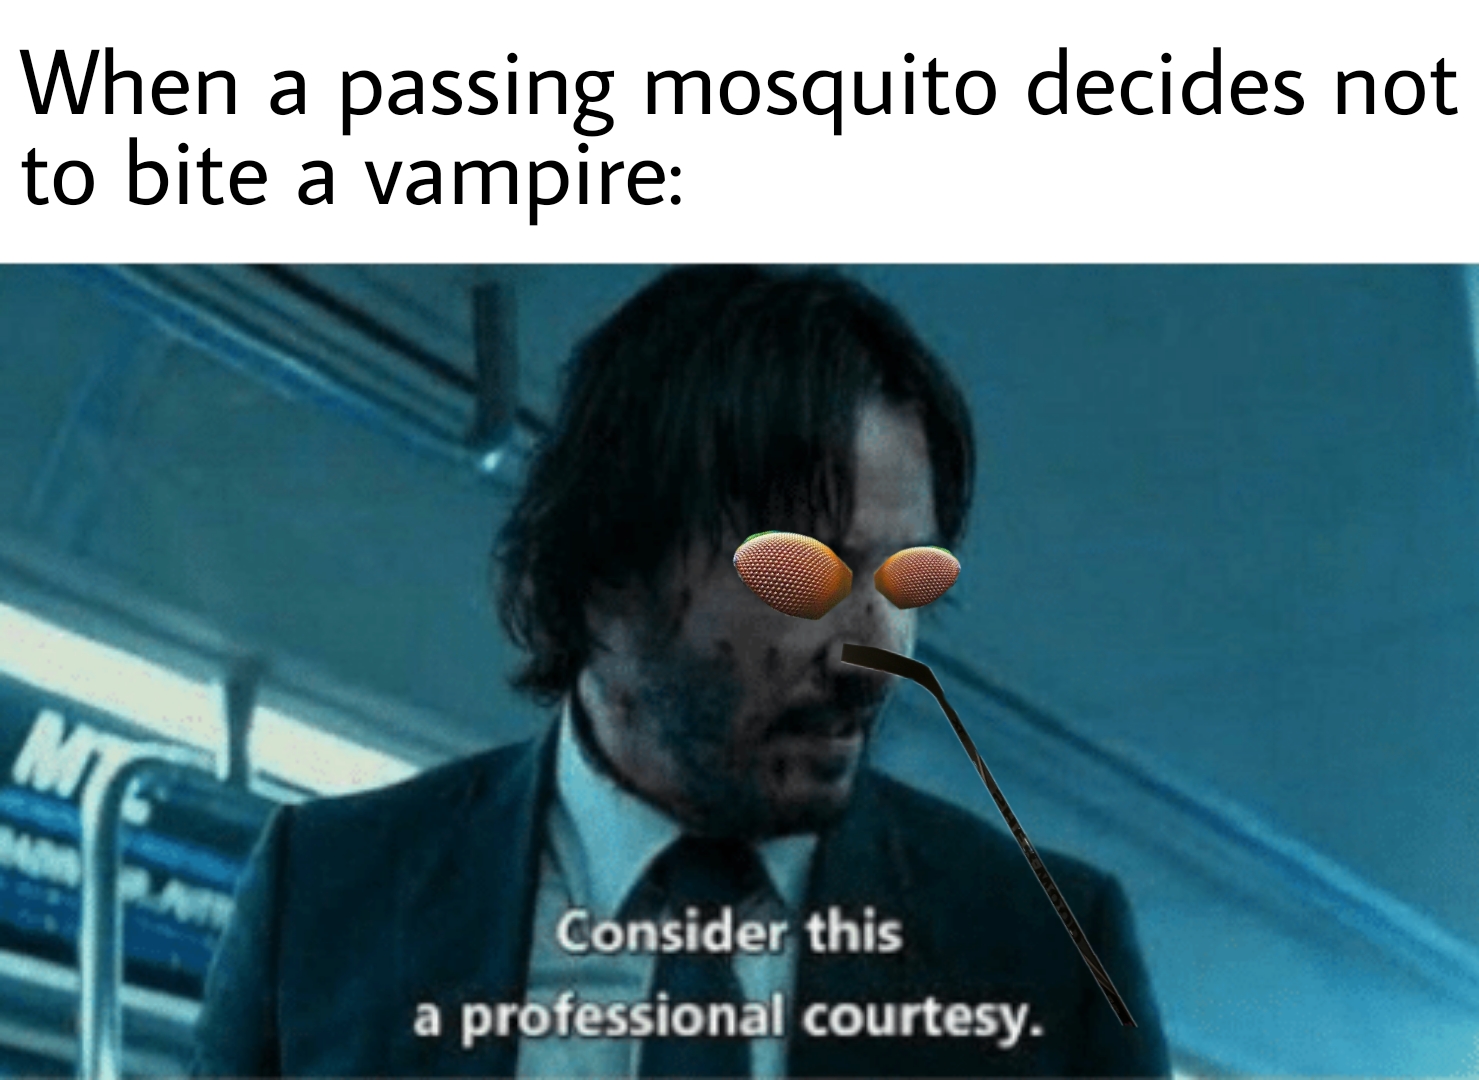 john wick consider it a professional courtesy - When a passing mosquito decides not to bite a vampire a Mg Consider this a professional courtesy.